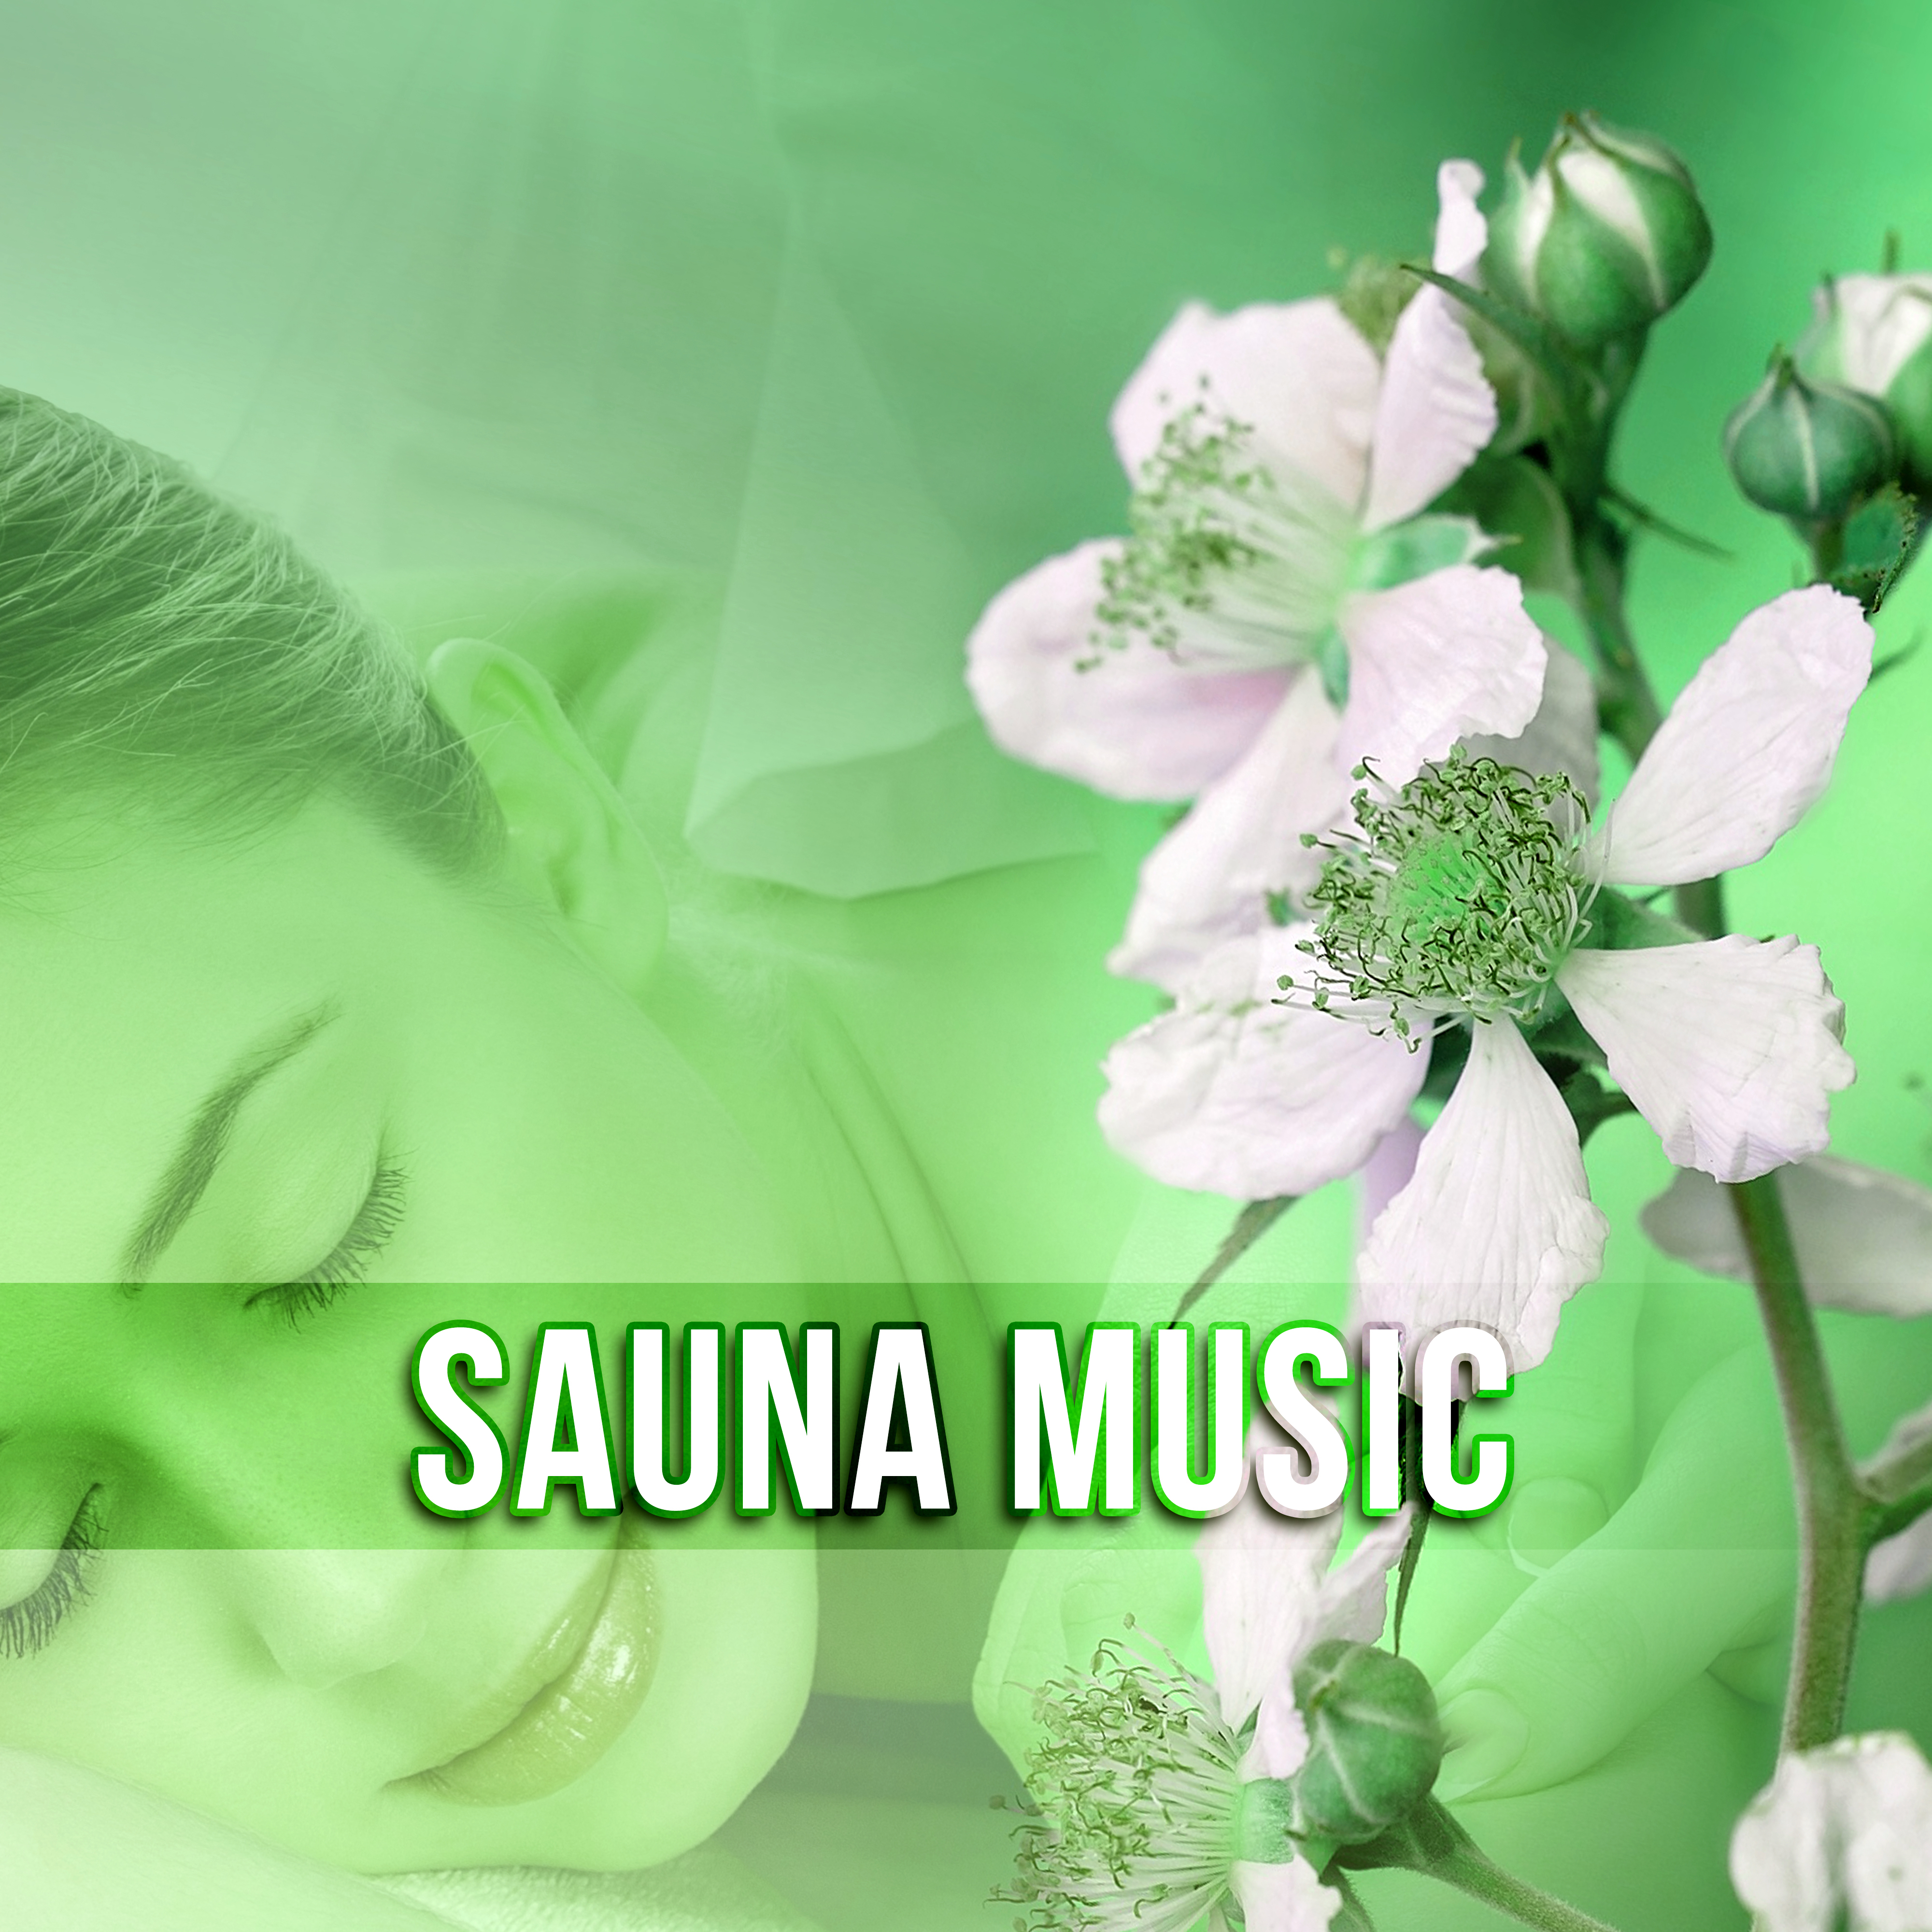 Sauna Music - Wellness, Hydrotherapy, Massage Music, Nature Sounds, Easy Going, Total Relax